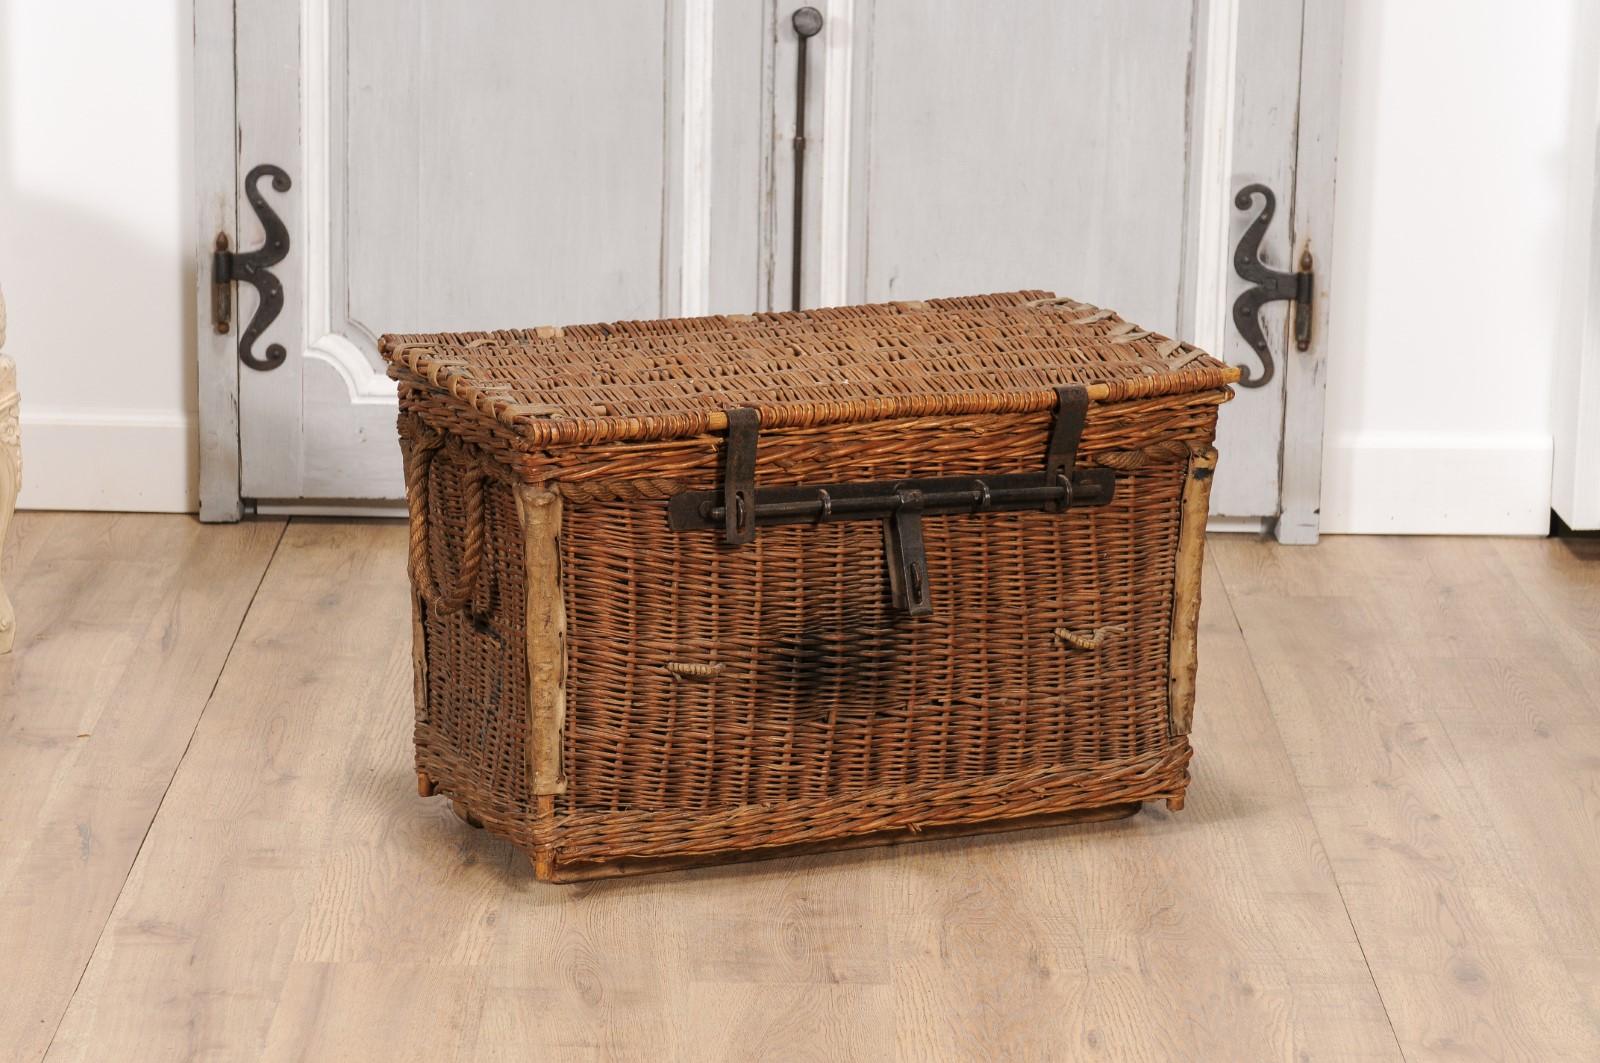 An English rustic wicker trunk from circa 1930 with iron hardware, rectangular lid, lateral handles and fabric lined interior. Capturing the essence of English craftsmanship, this rustic wicker trunk from circa 1930 is an exquisite fusion of form